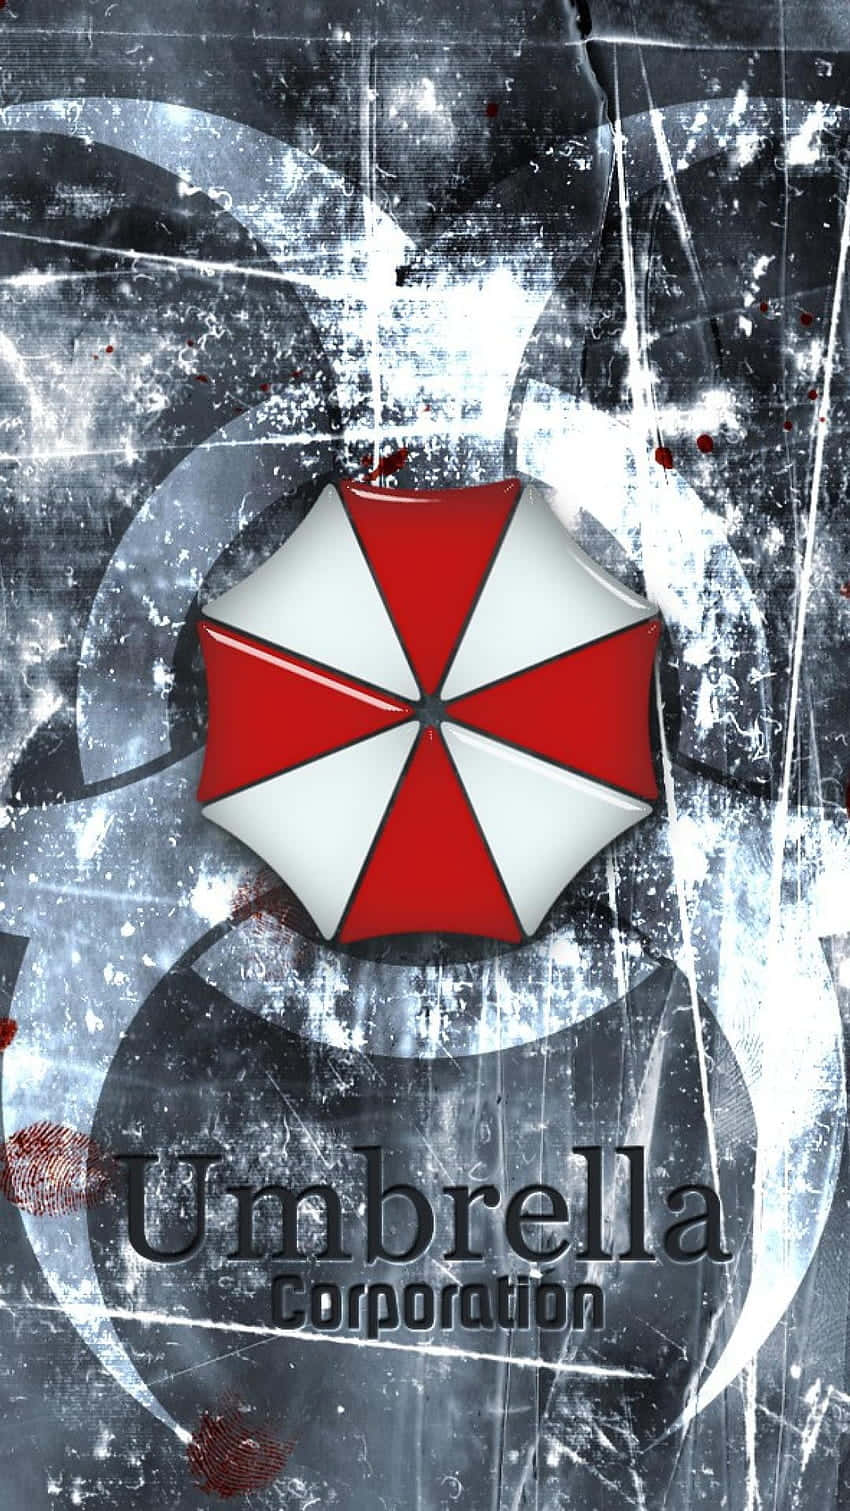 Resident Evil: Is the iconic Resident Evil logo being used by a